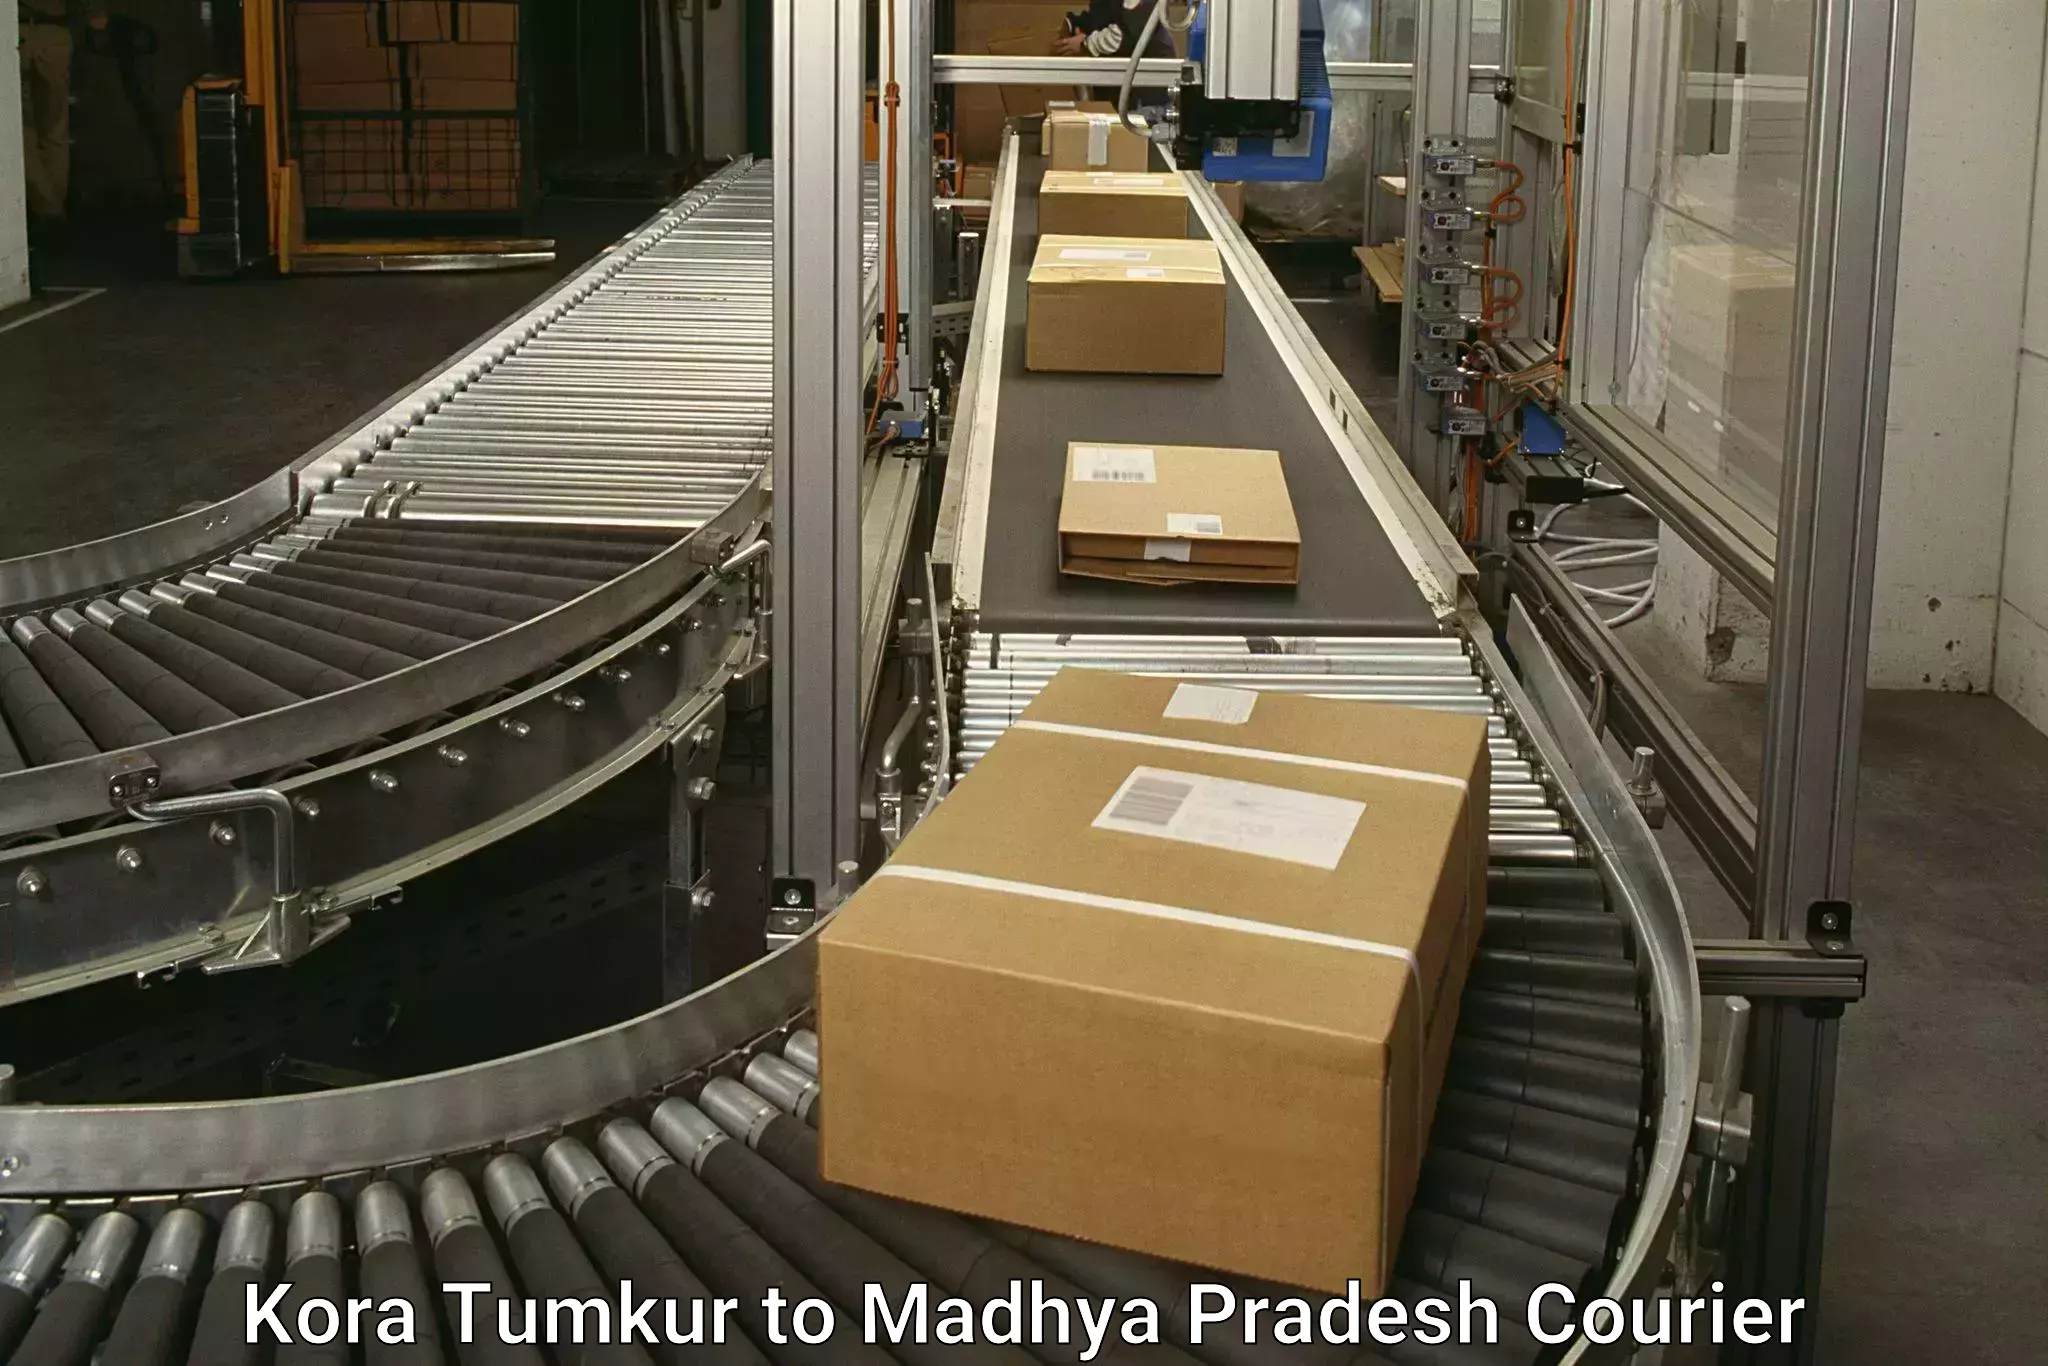 Multi-national courier services Kora Tumkur to Dhamnod